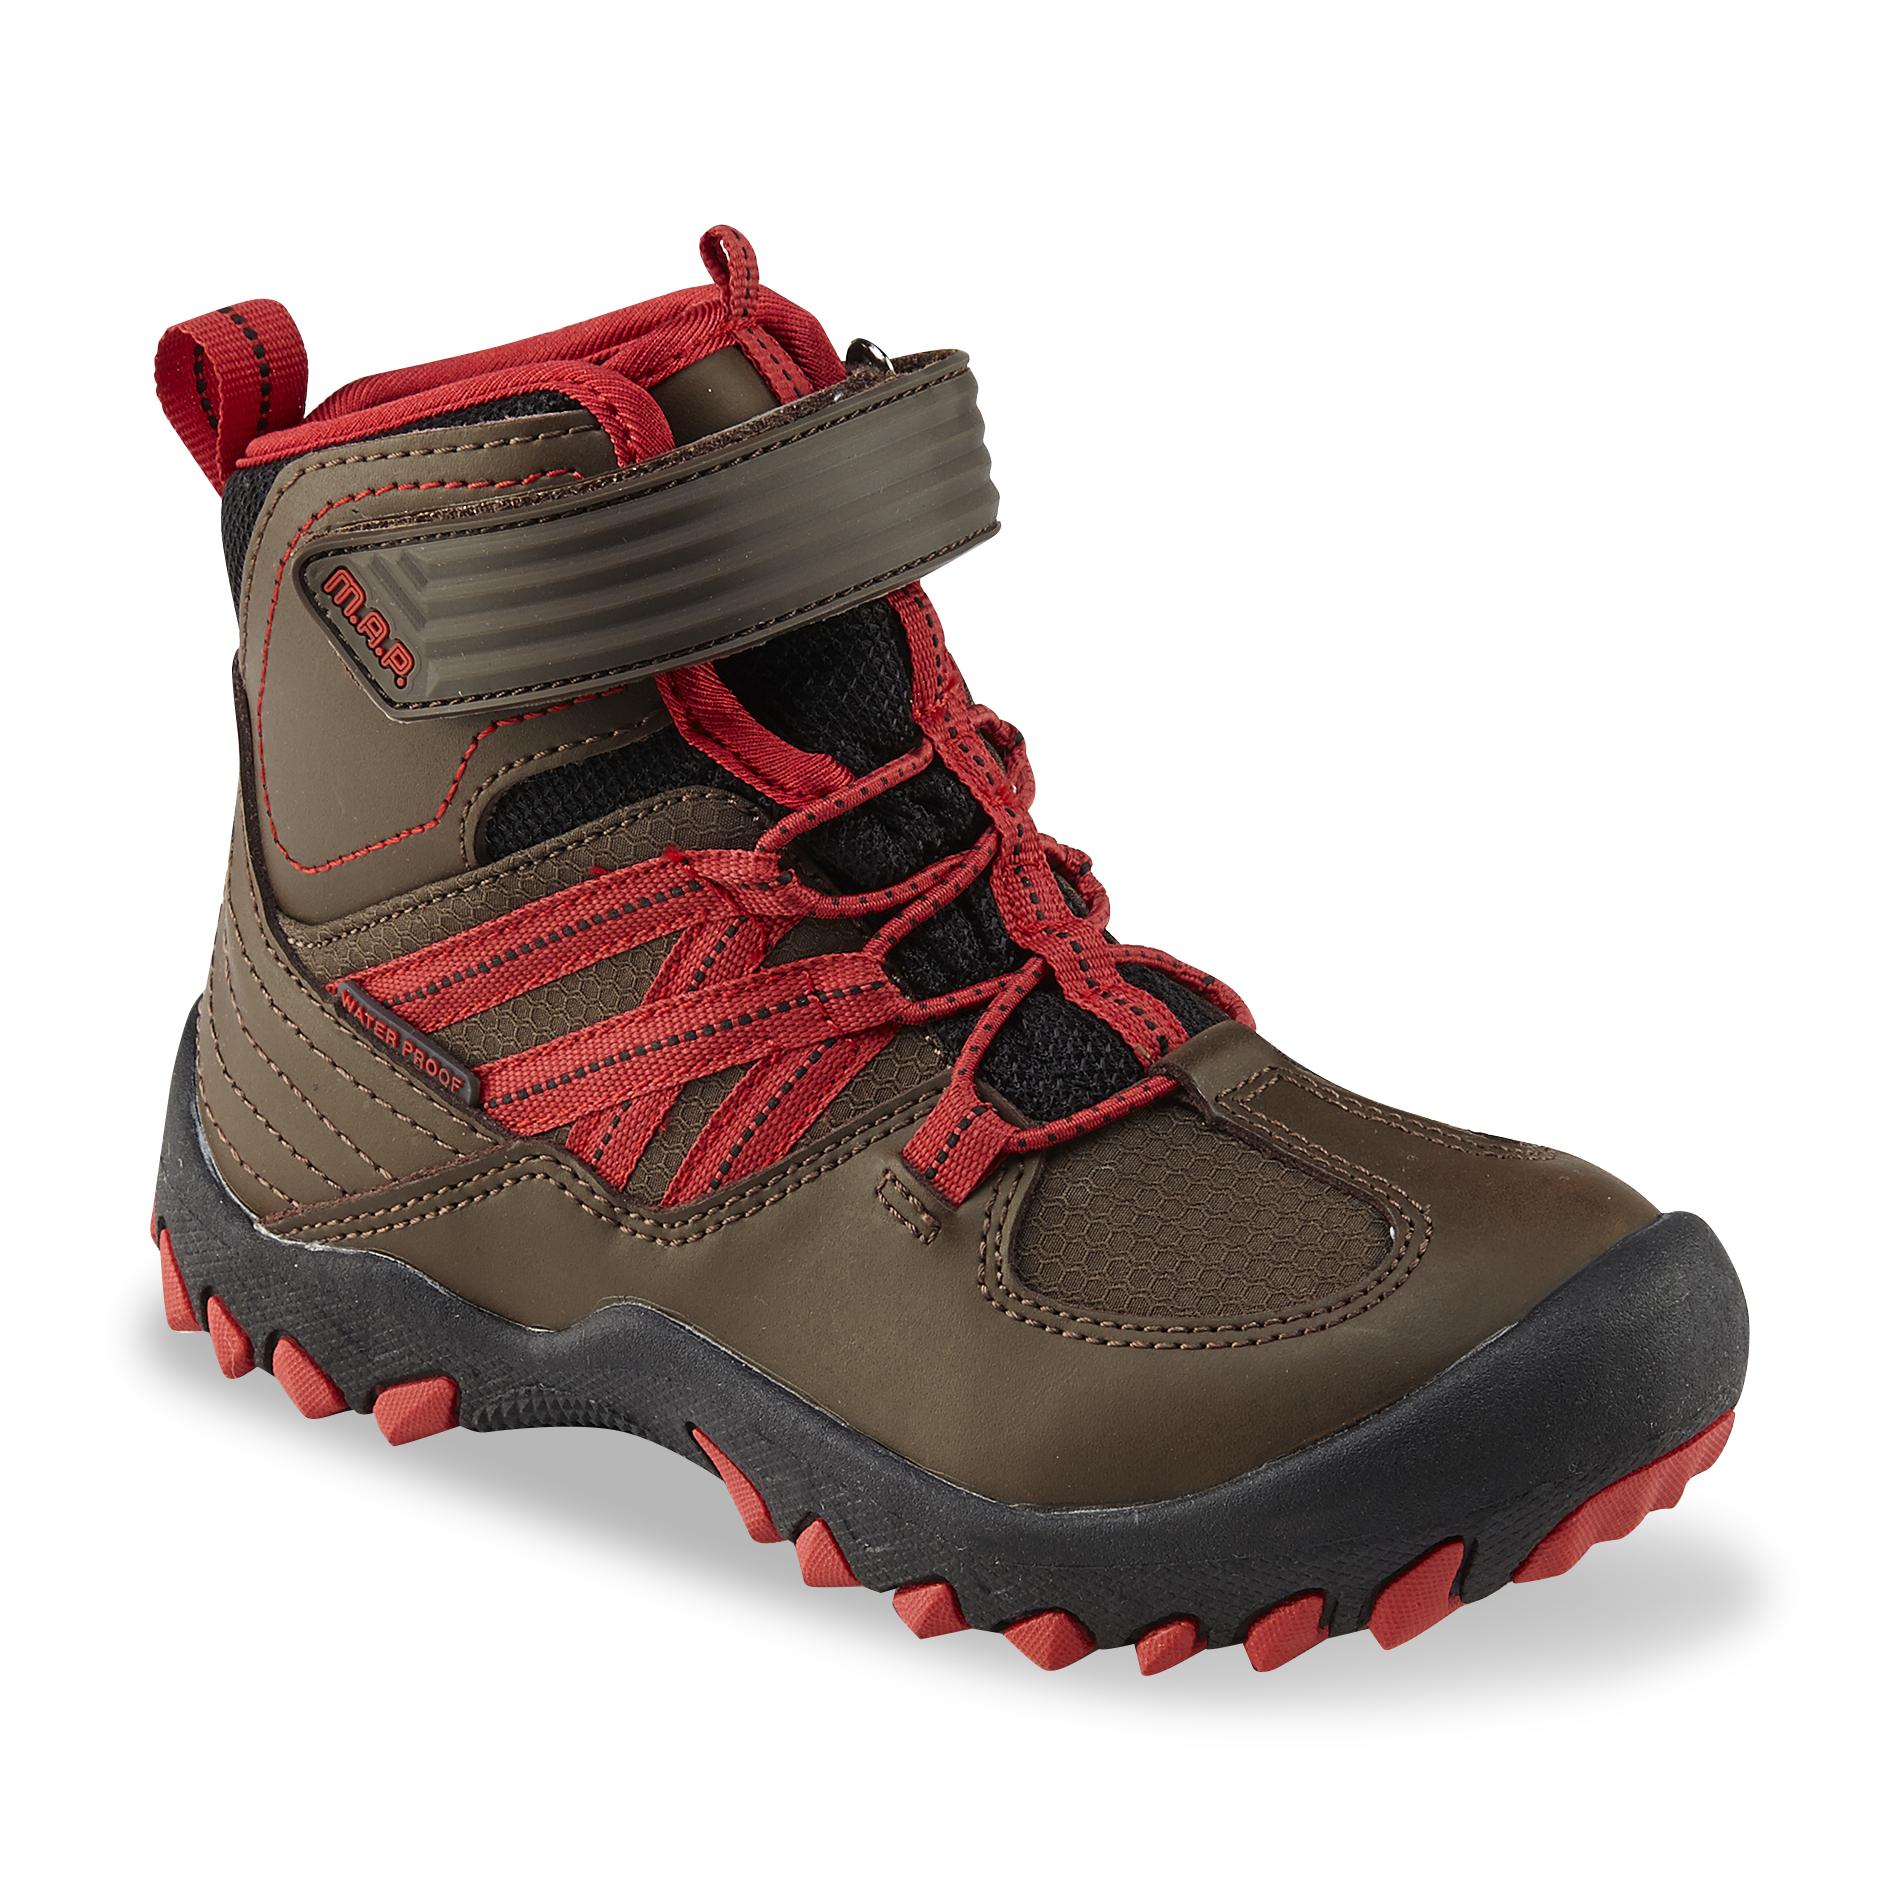 M.A.P. Boy's Alps Brown/Red Waterproof Hiking Boot